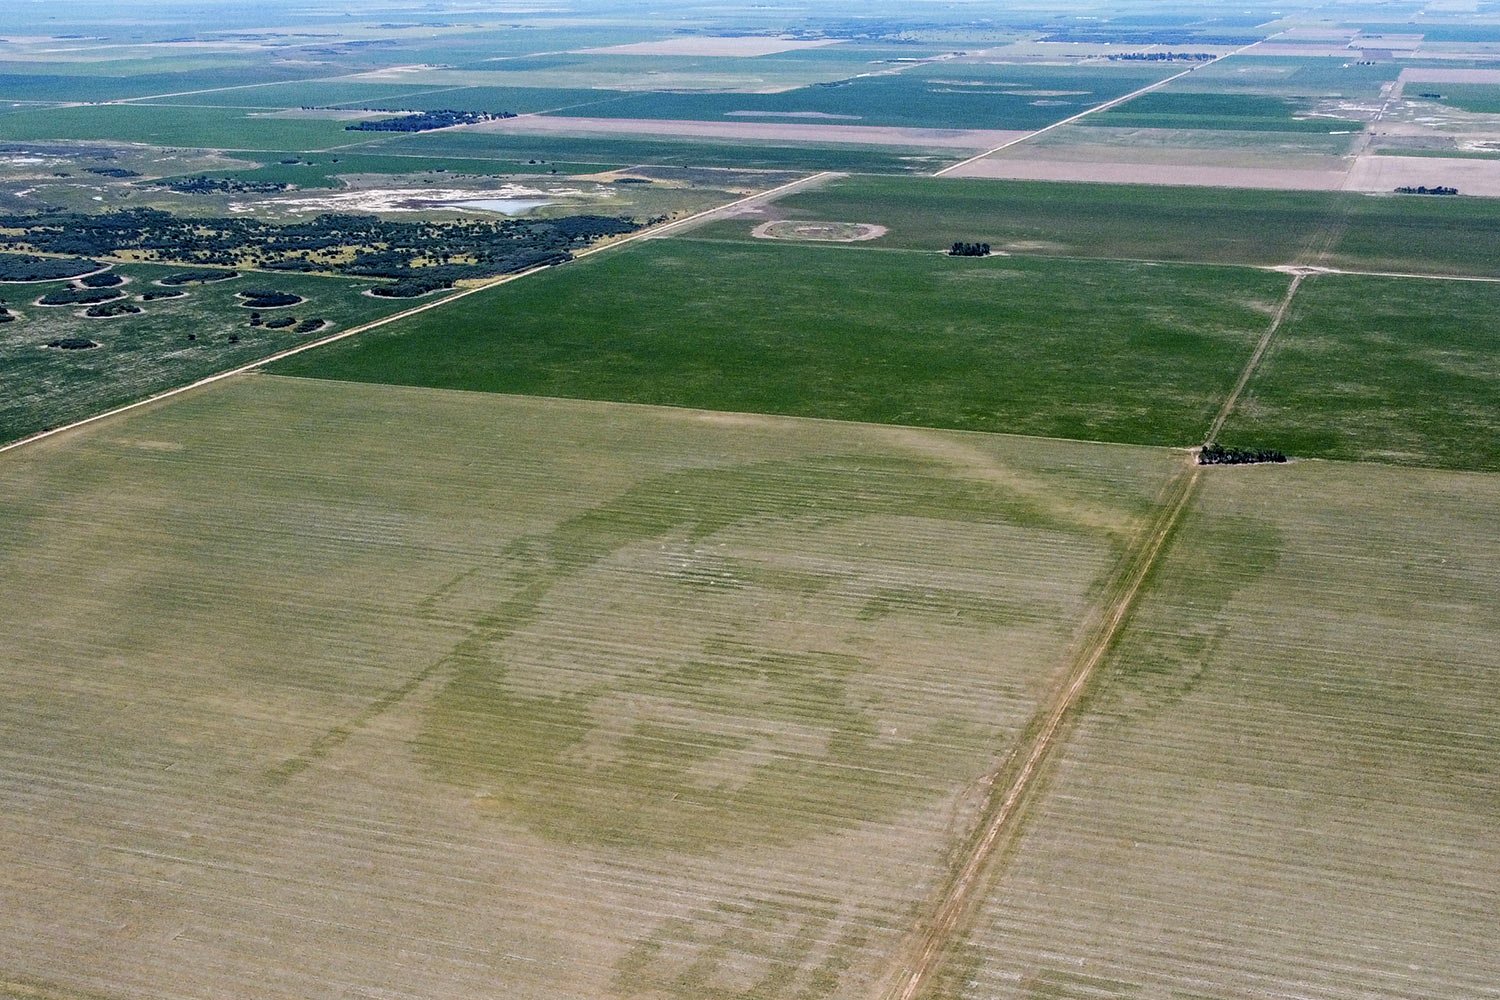  A cornfield features an image of Argentine soccer player Lionel Messi in Cordoba, Argentina, Jan. 4, 2023, on the day it was created. According to the farmer, Pablo Luccero, his planter machine has the technology to imprint images fed to it electron